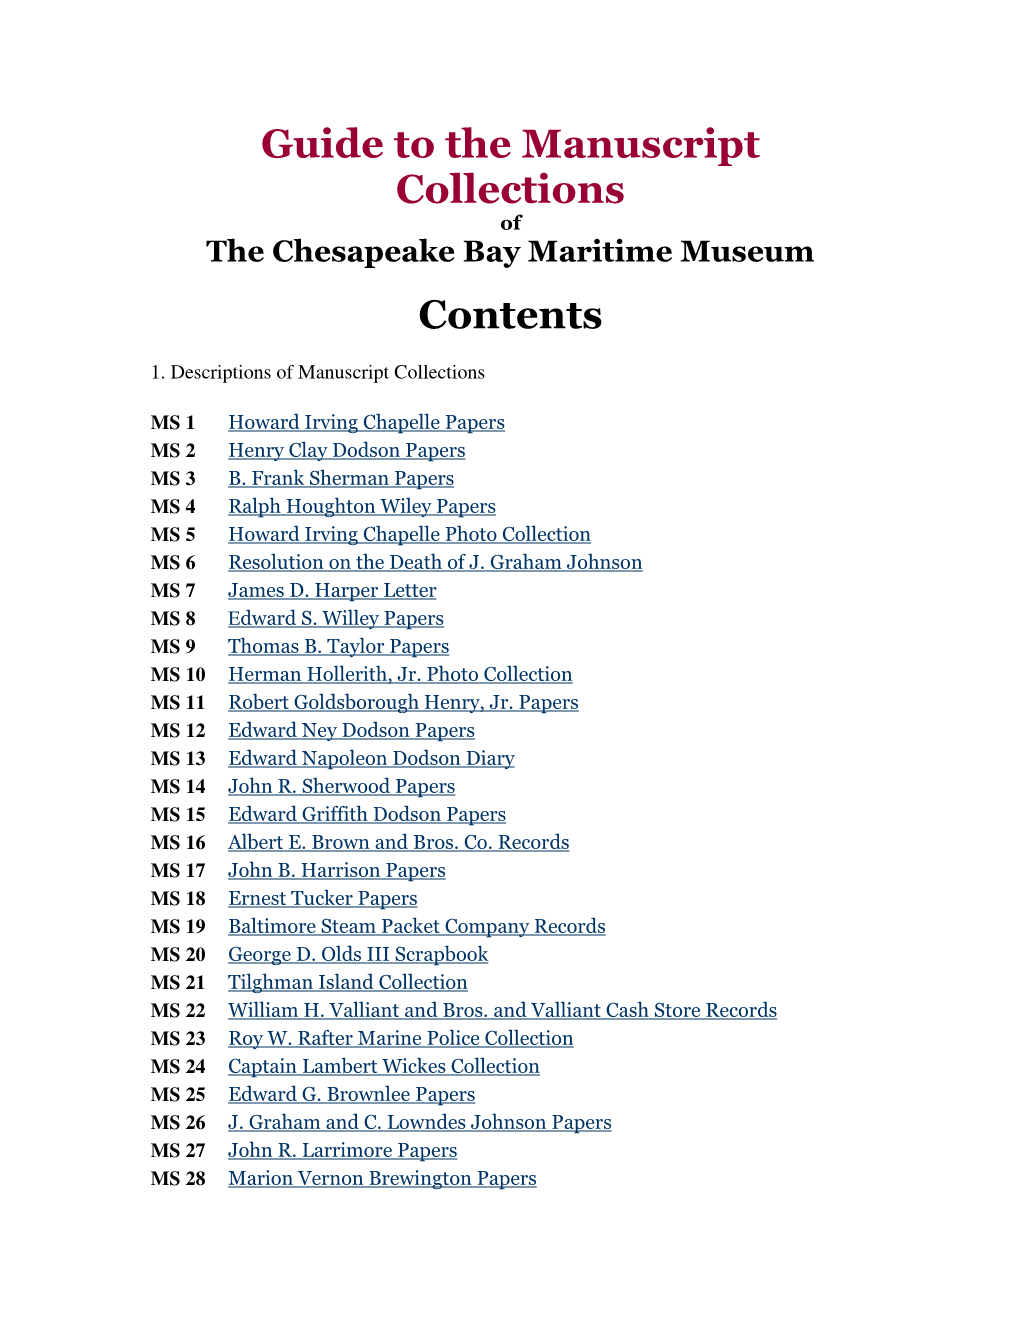 Guide to the Manuscript Collections Contents